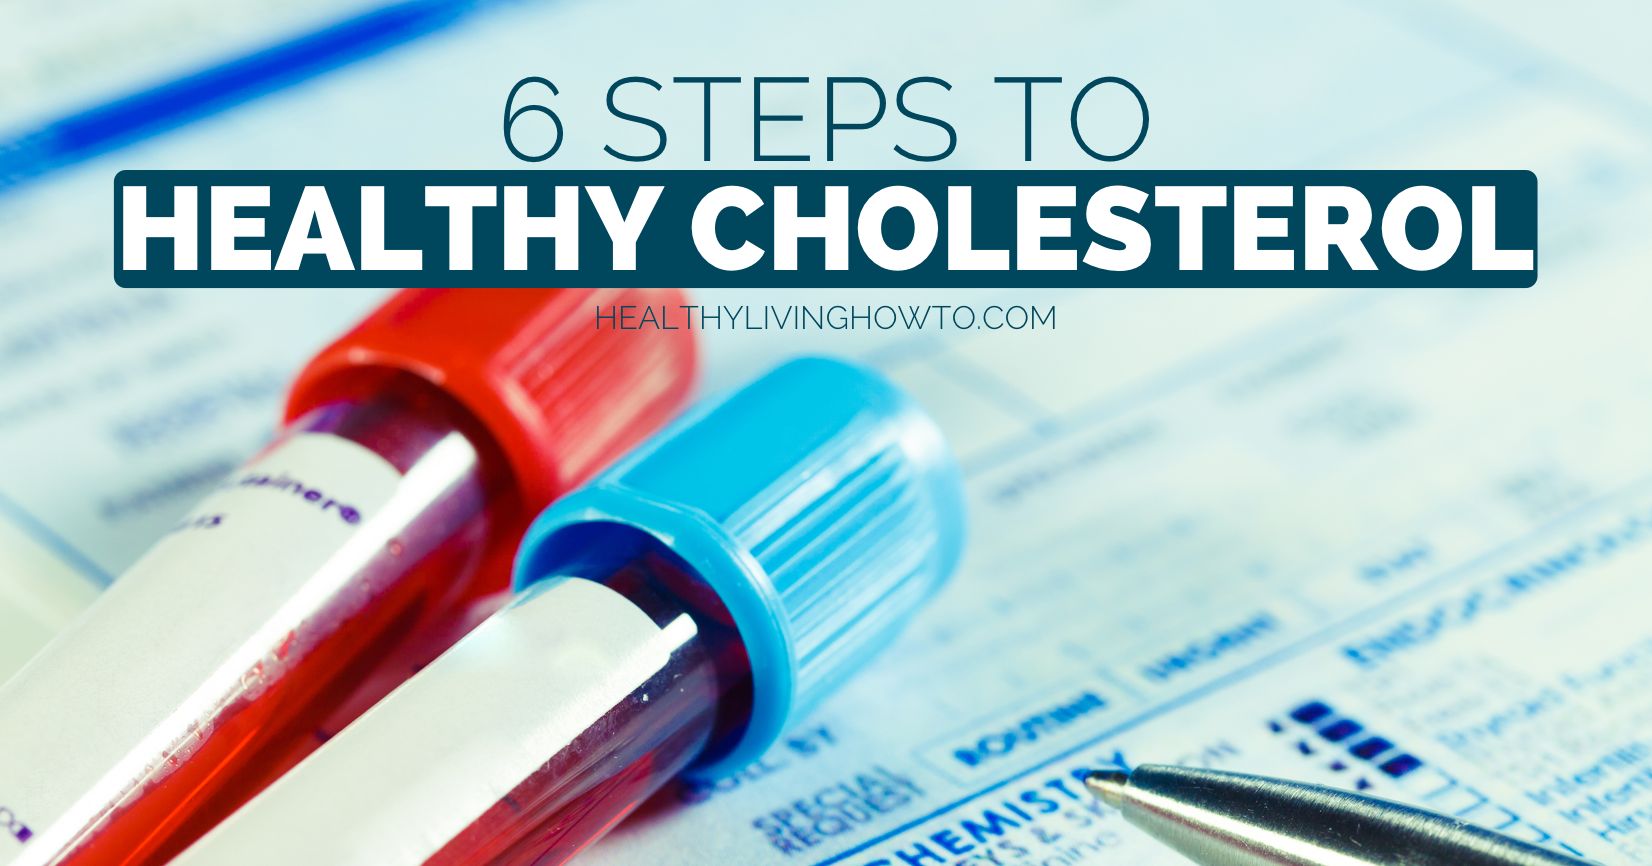 6 Steps To Healthy Cholesterol | healthylivinghowto.com